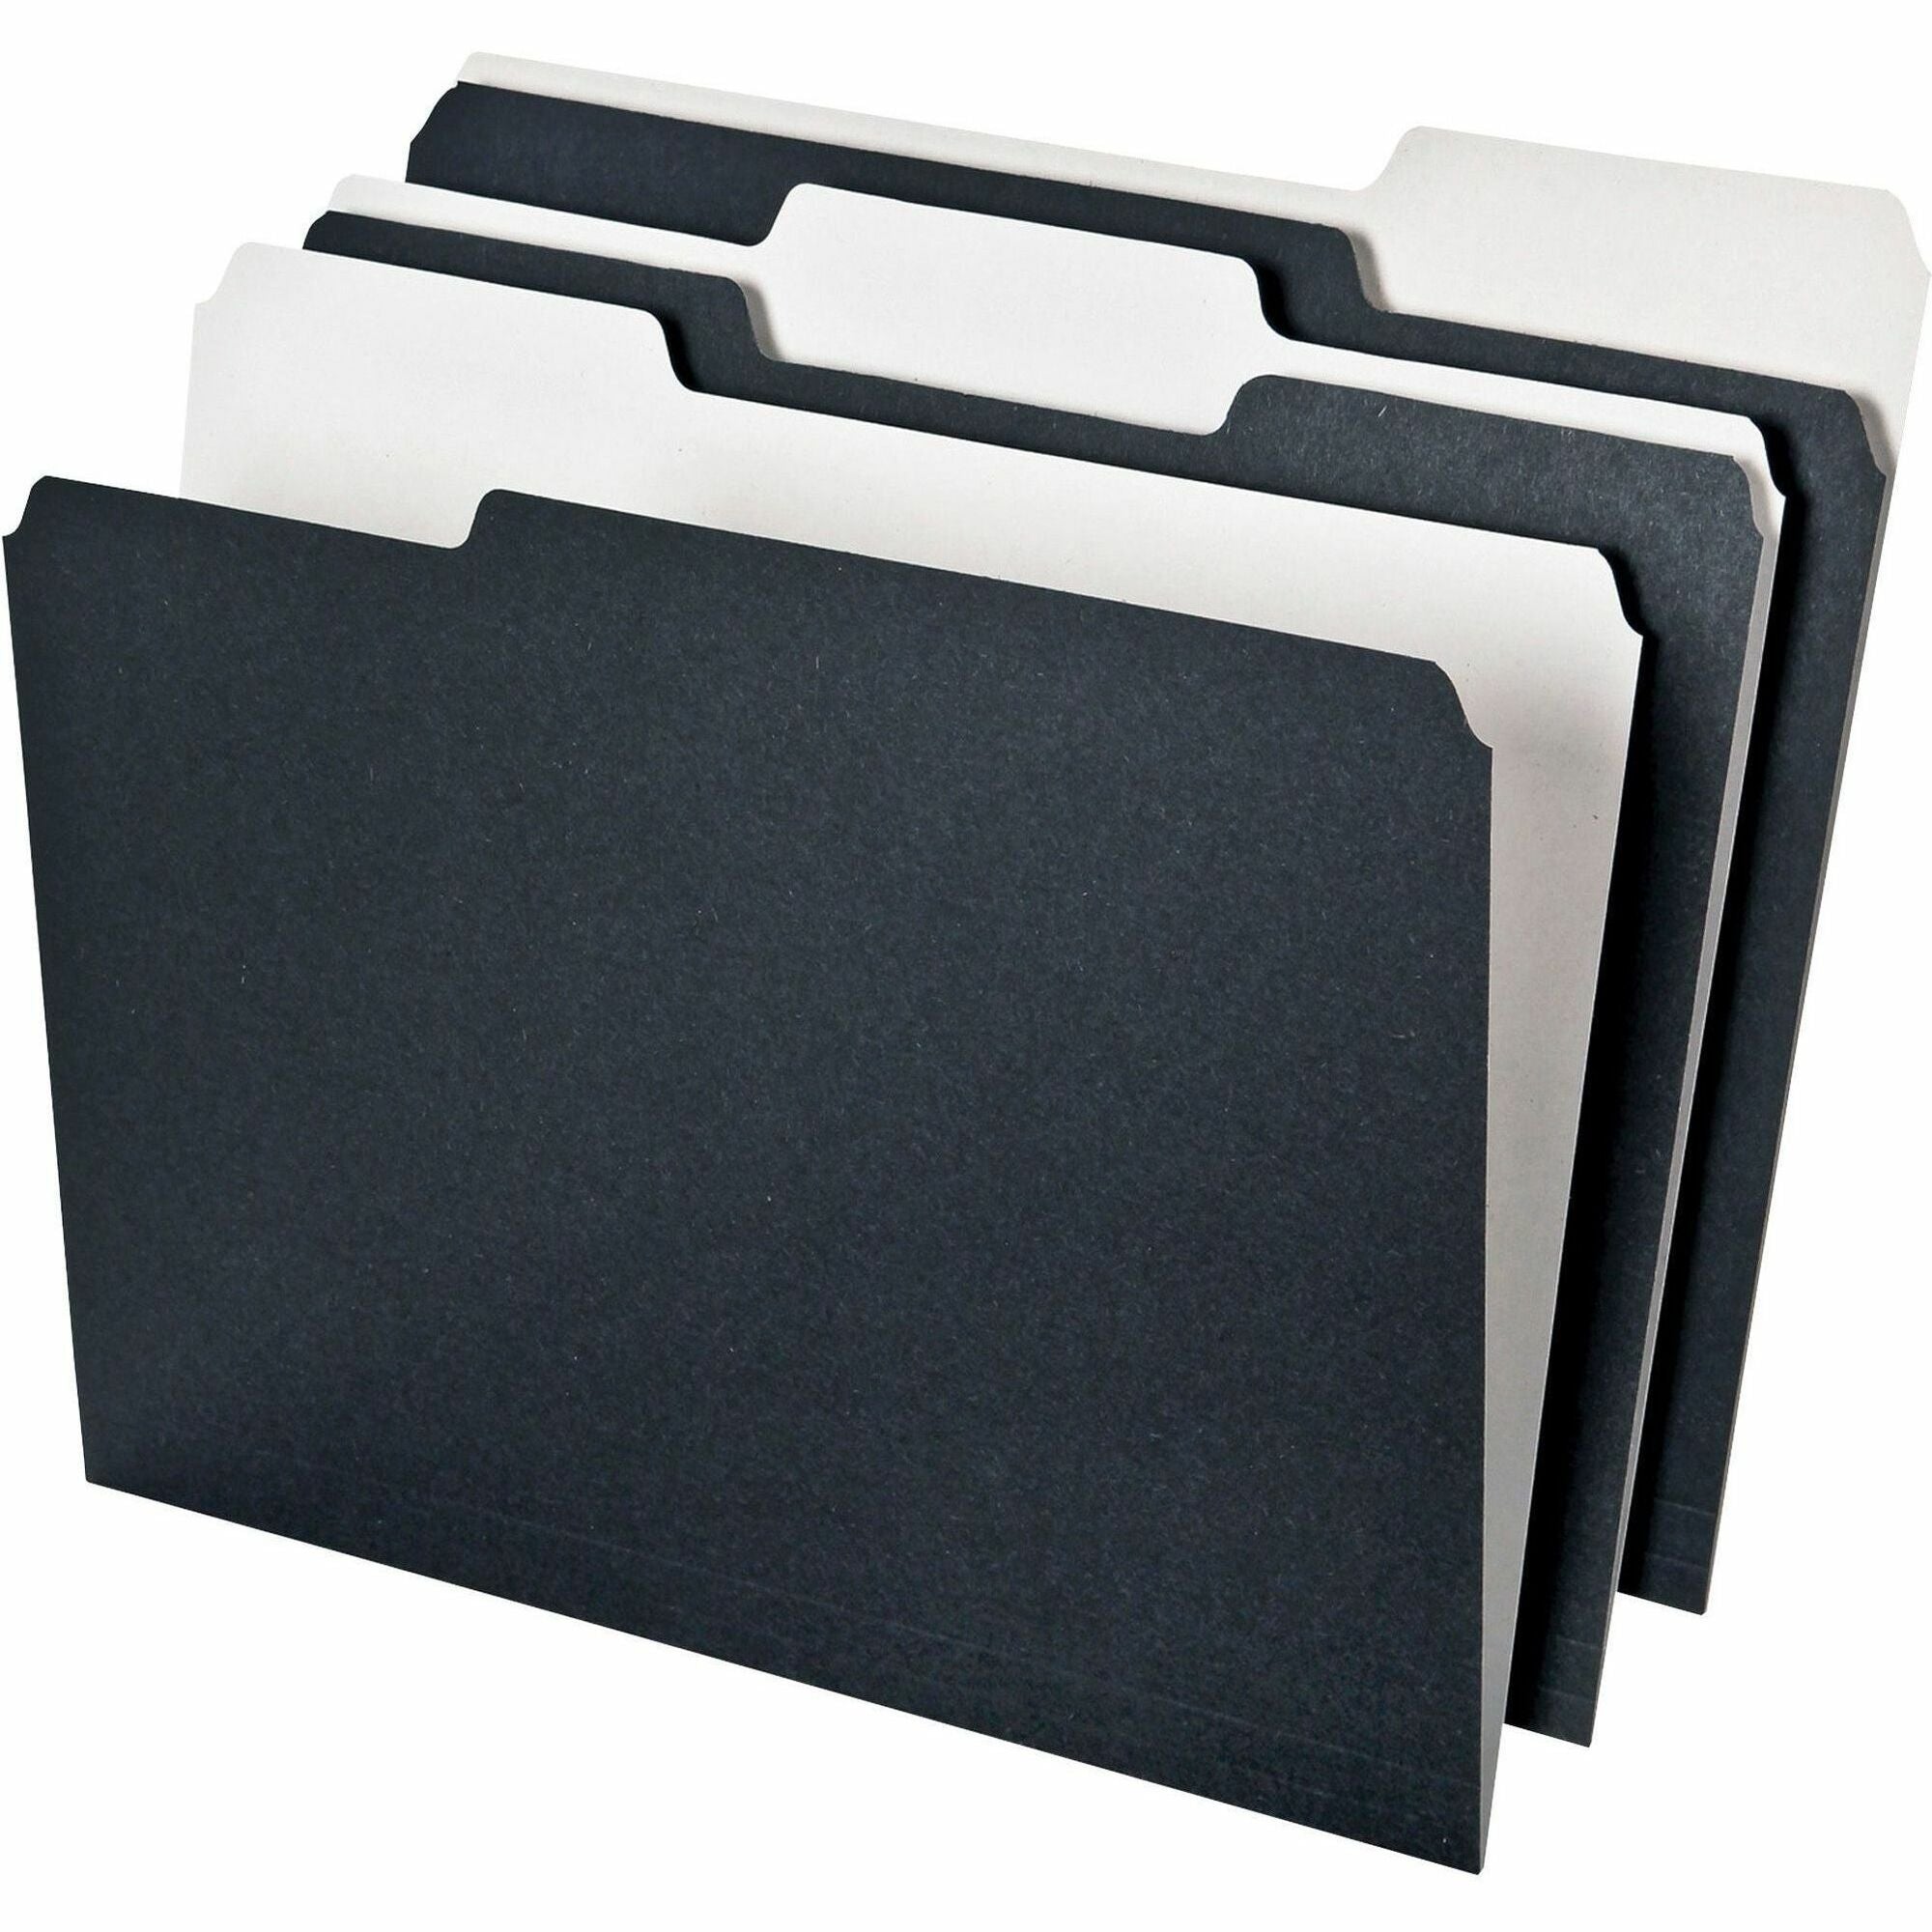 Pendaflex 1/3 Tab Cut Recycled Top Tab File Folder - Top Tab Location - Assorted Position Tab Position - Black, White - 100% Recycled - 50 / Pack - 